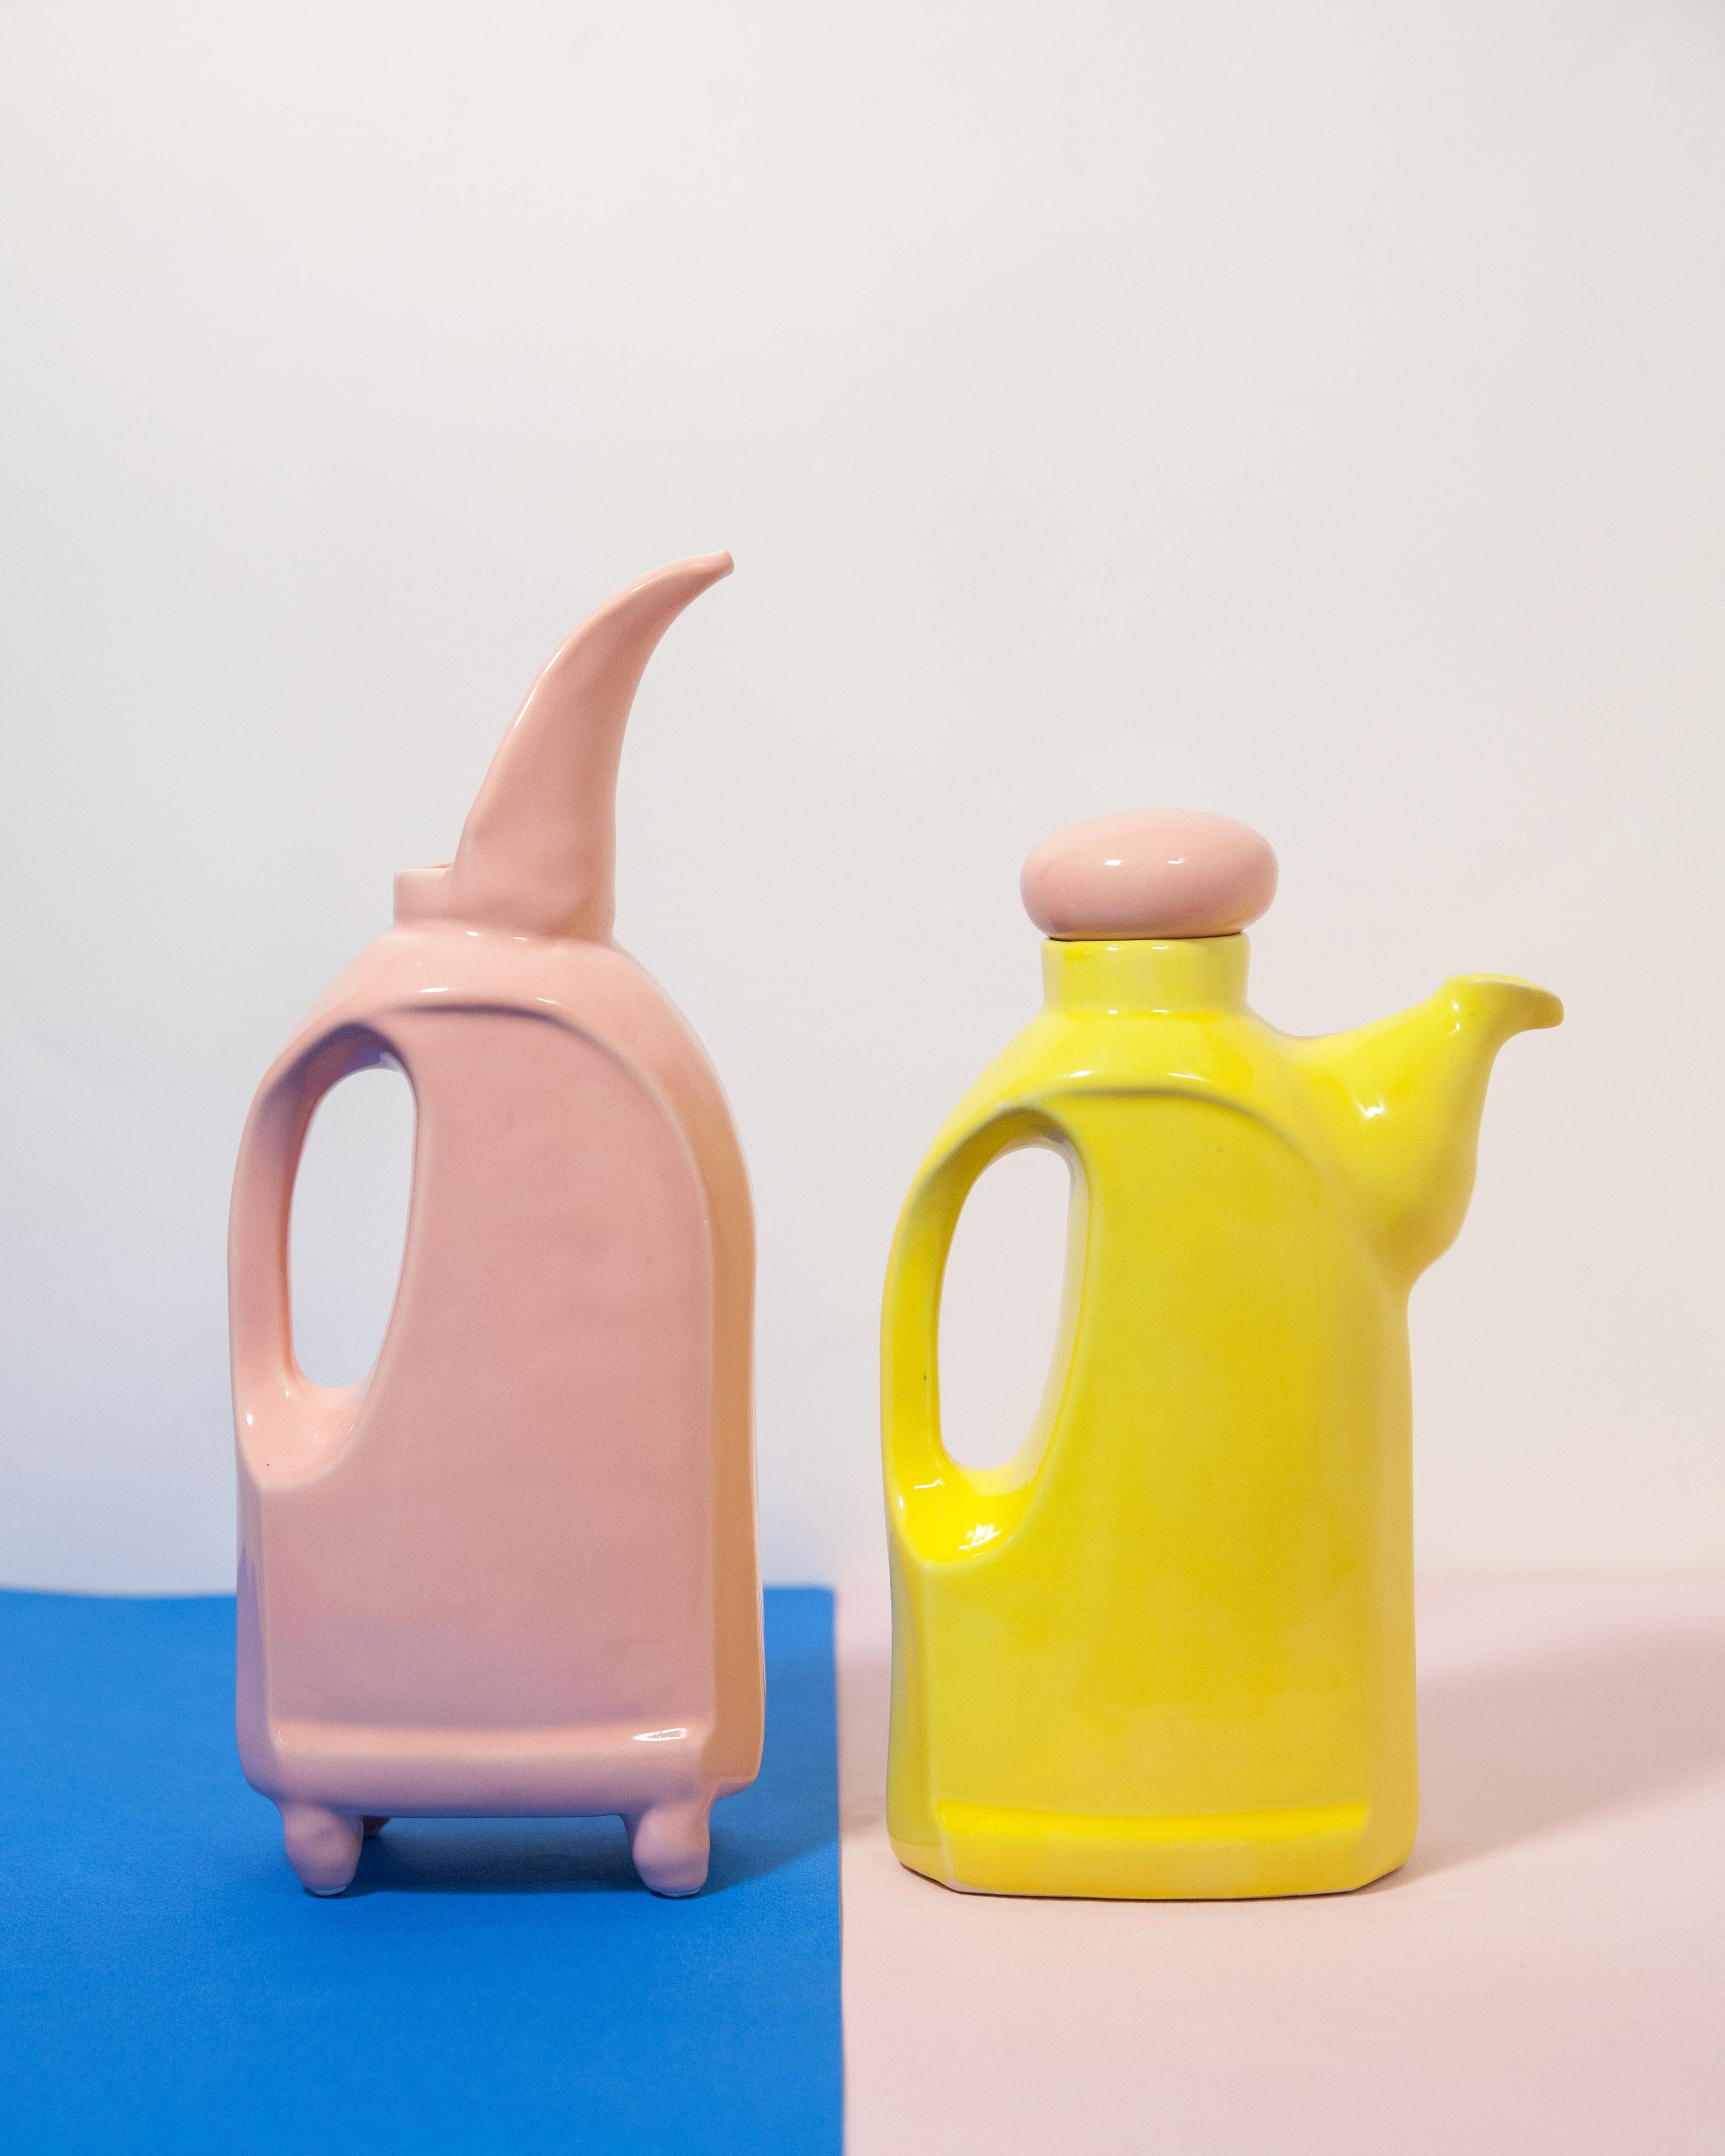 French Laundry Pink Carafe by Lola Mayeras